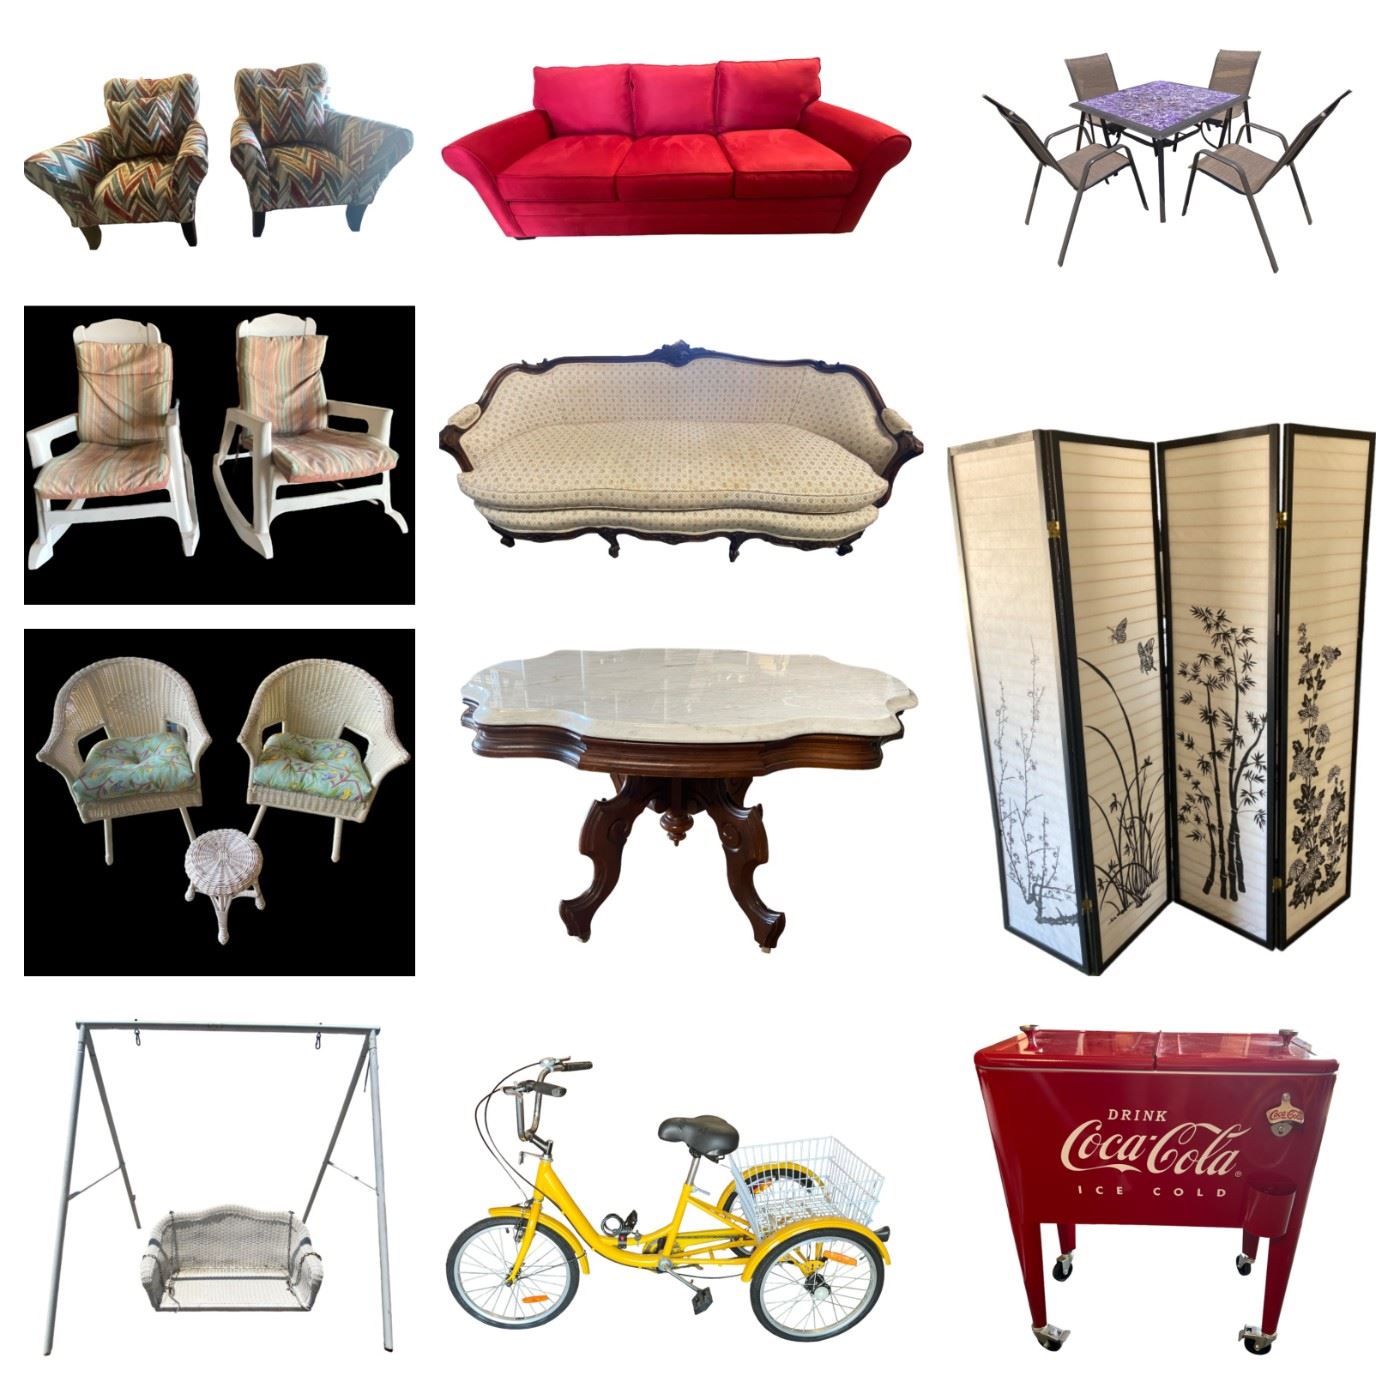 Cowboy Boots - Grand Perregaux 14k Gold Watch - Coca-Cola Cooler on Wheels - Viribus Pedal Powered Trike - Antique French Provincial Sofa - Wicker Patio Furniture - Queen Sleeper Sofa - Marble Top Coffee Table & More!